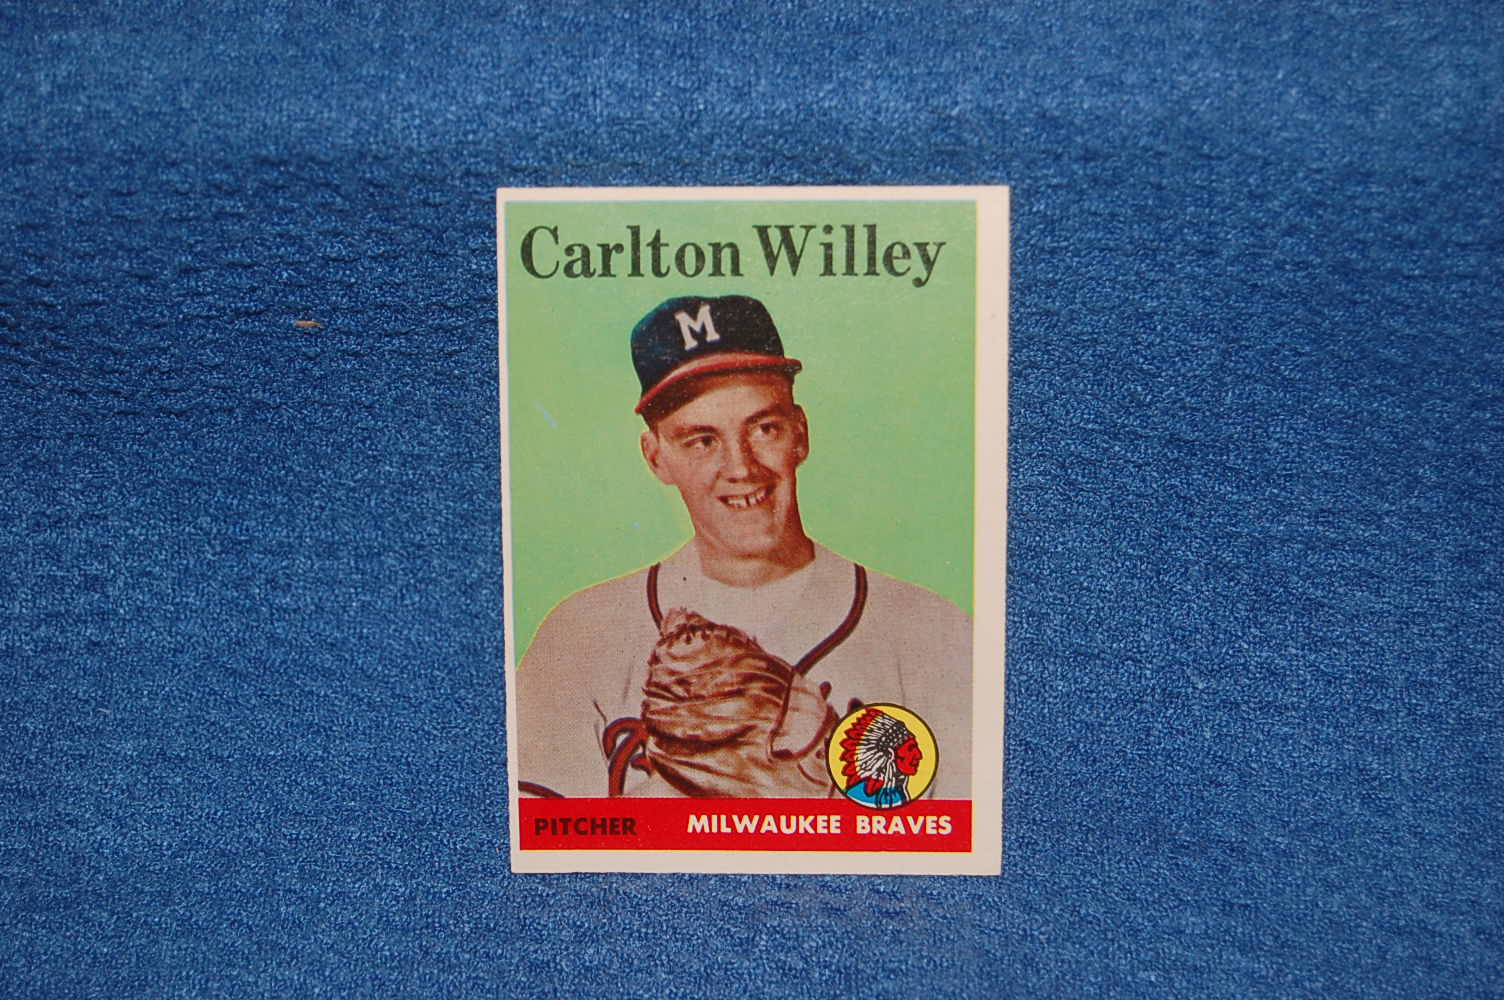 1958 Topps #407 Carlton Willey RC